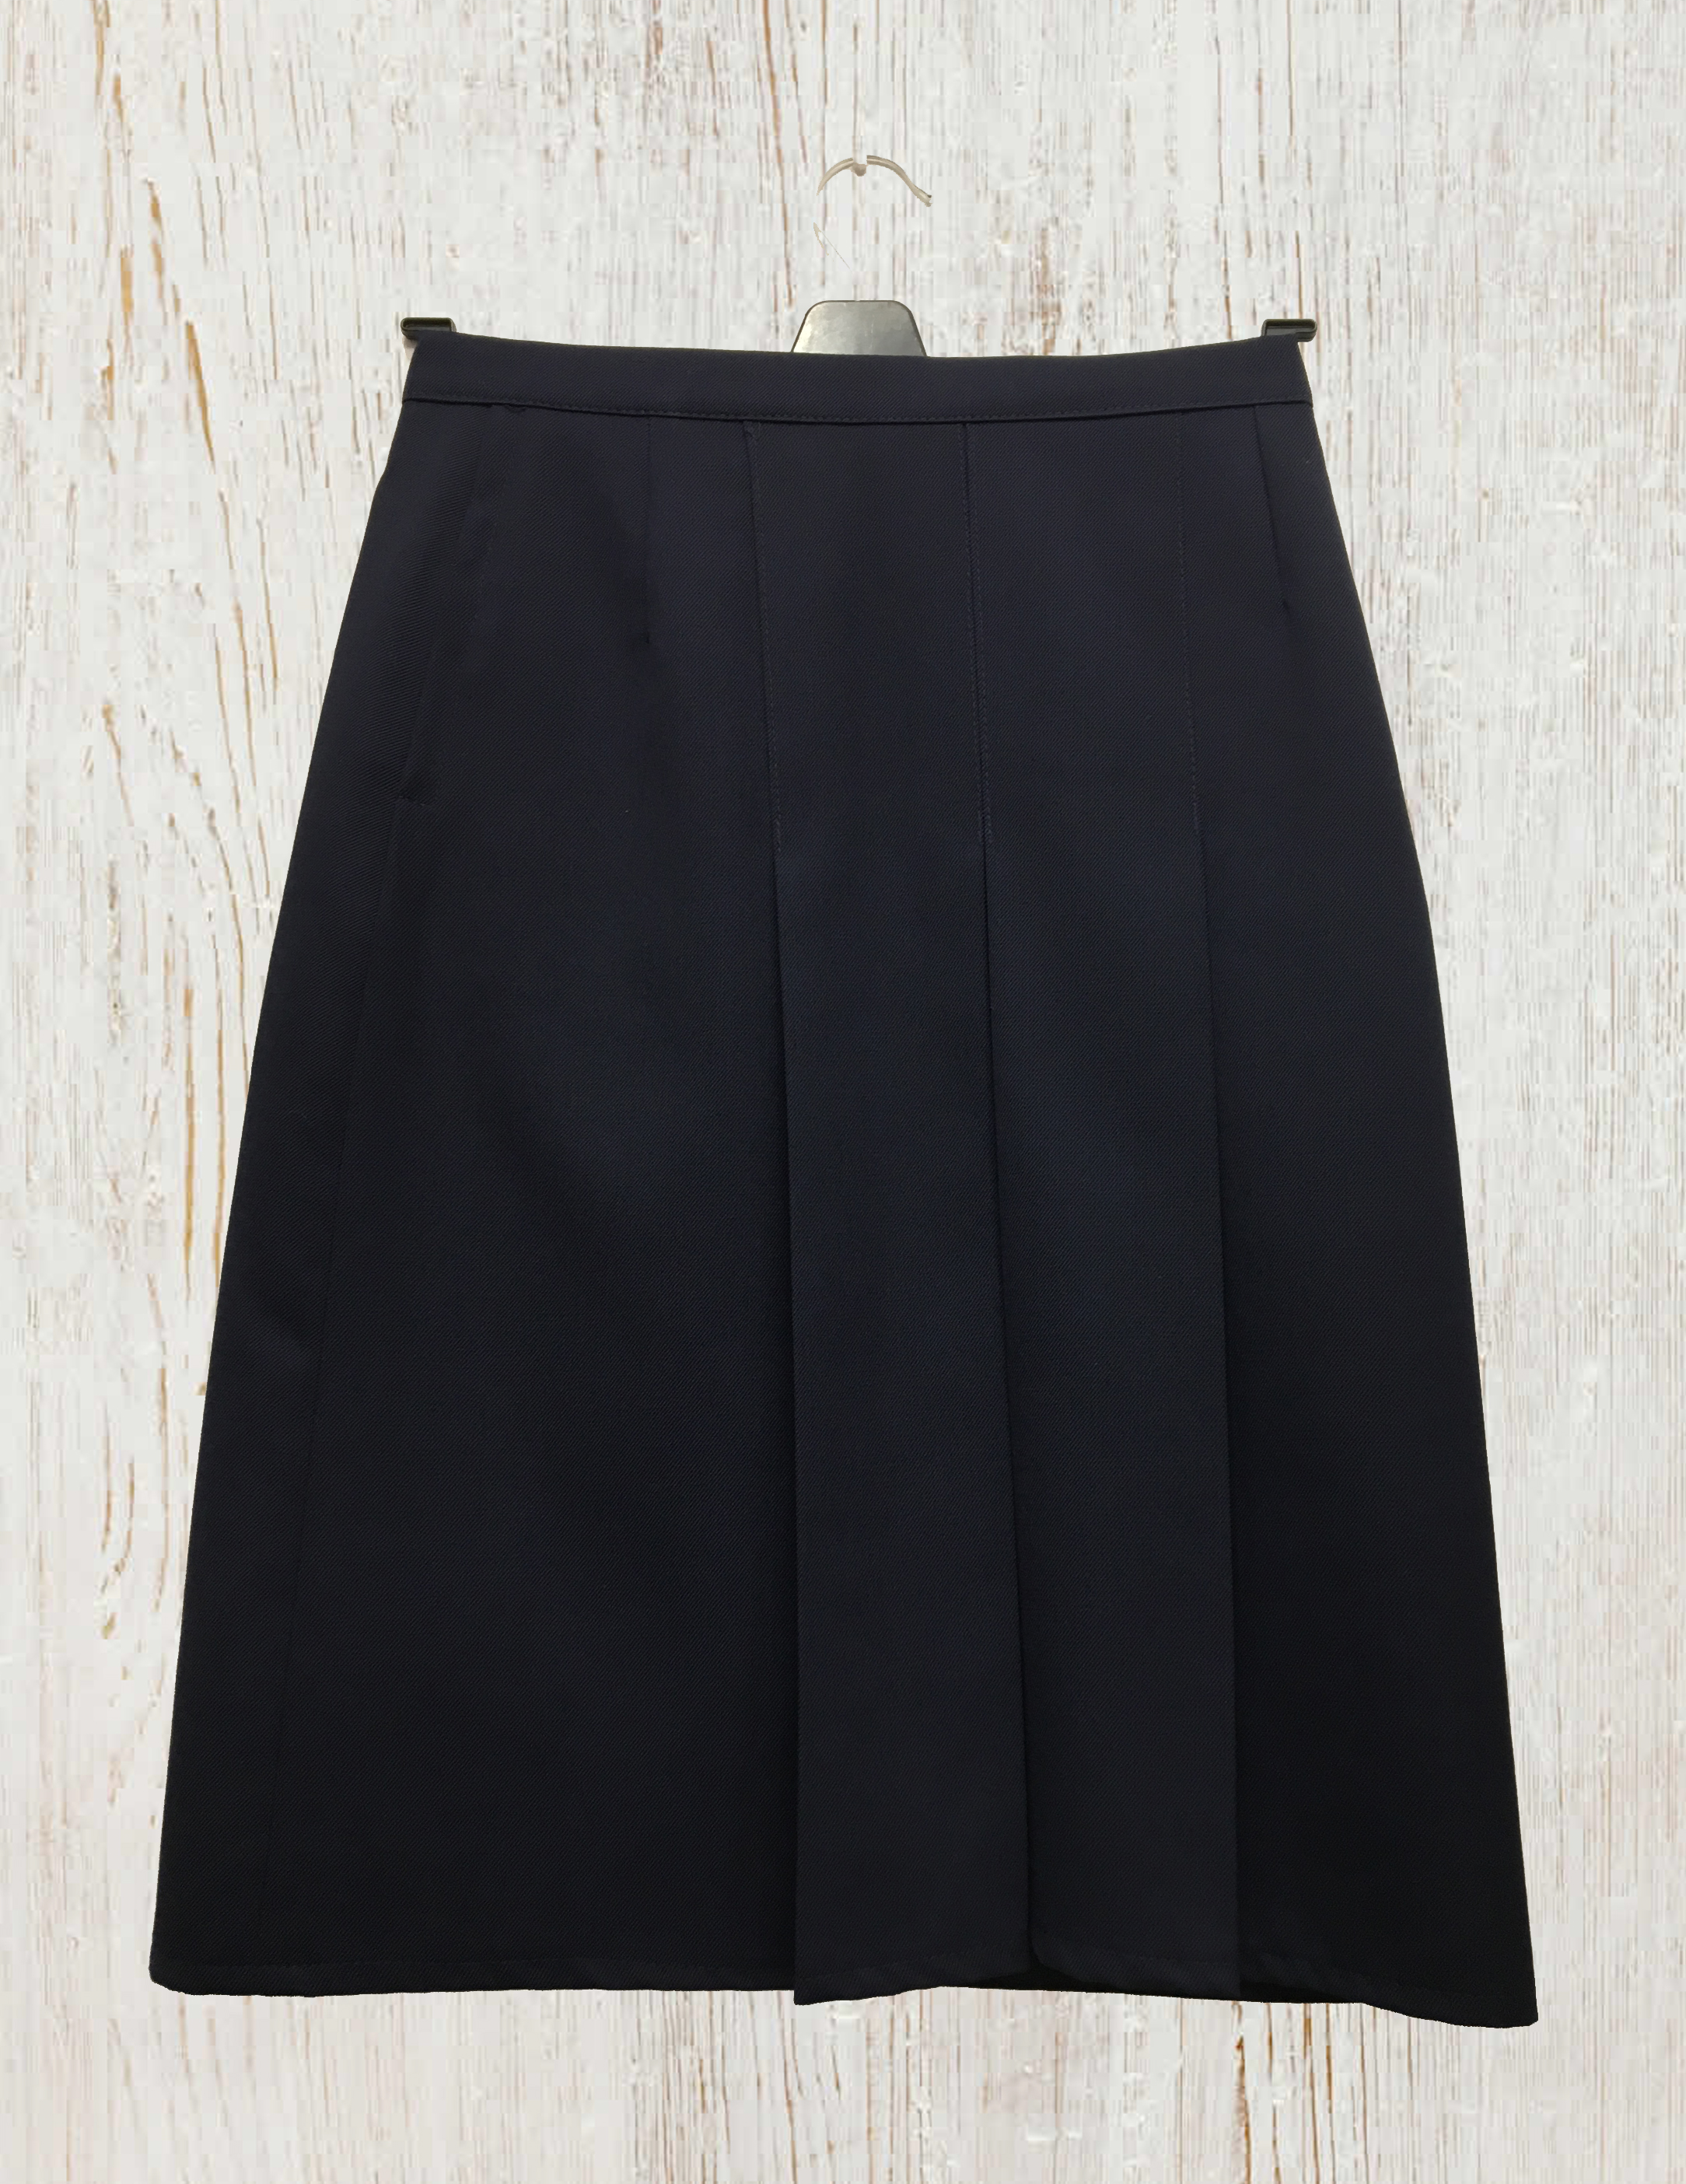 Taylor’s Hill Skirt (THS) - The Schoolwear CentreThe Schoolwear Centre